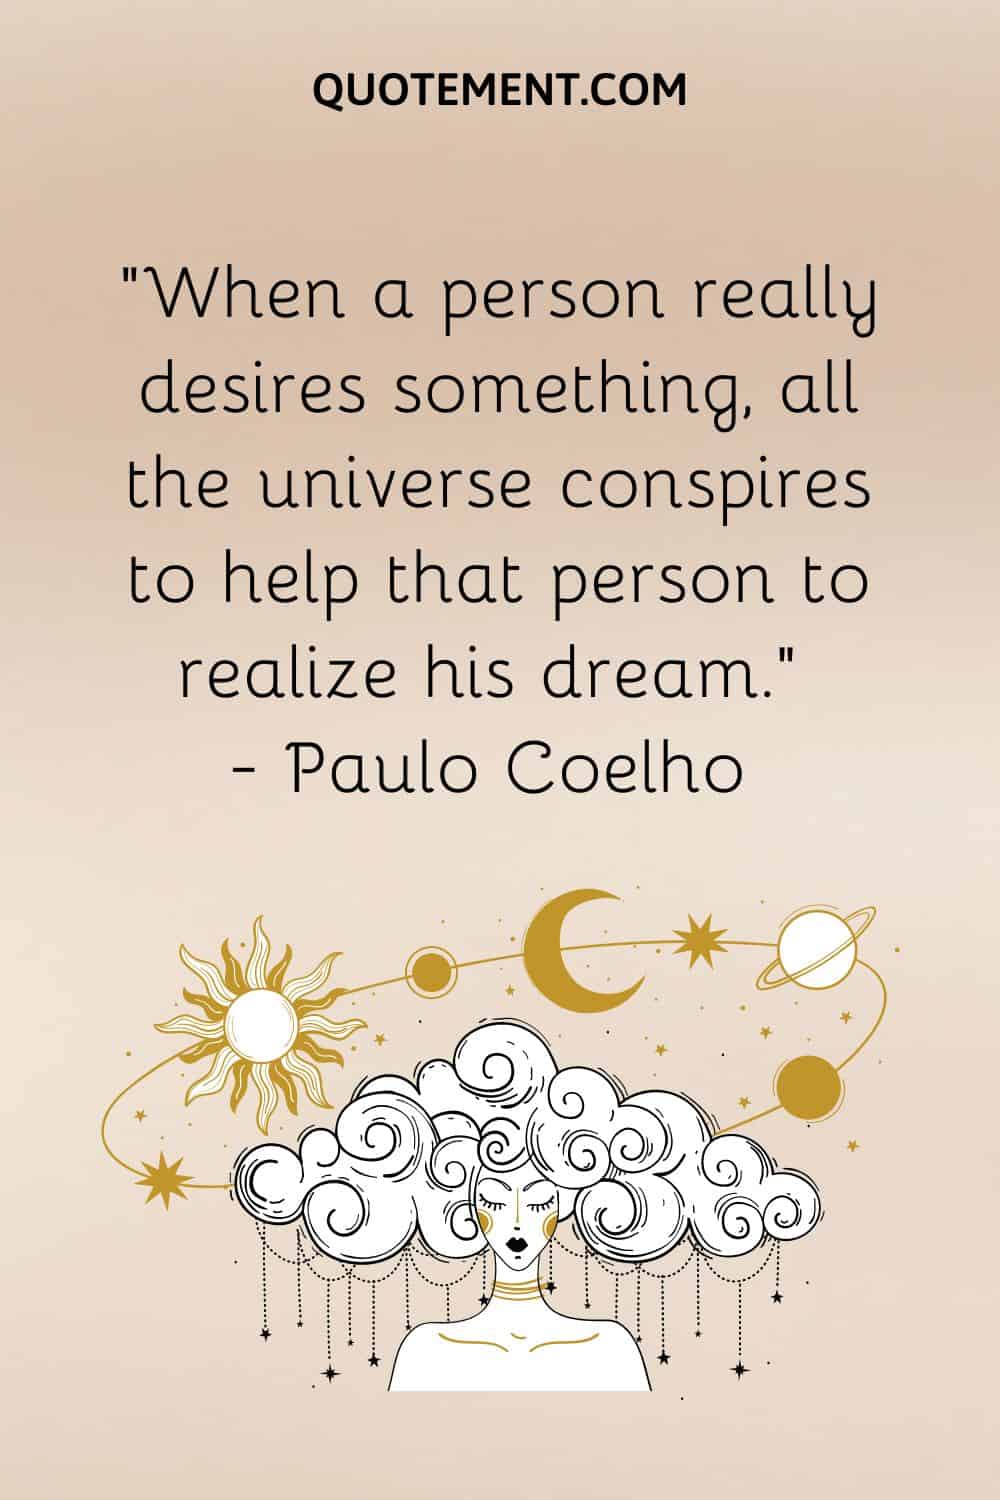 When a person really desires something, all the universe conspires to help that person to realize his dream